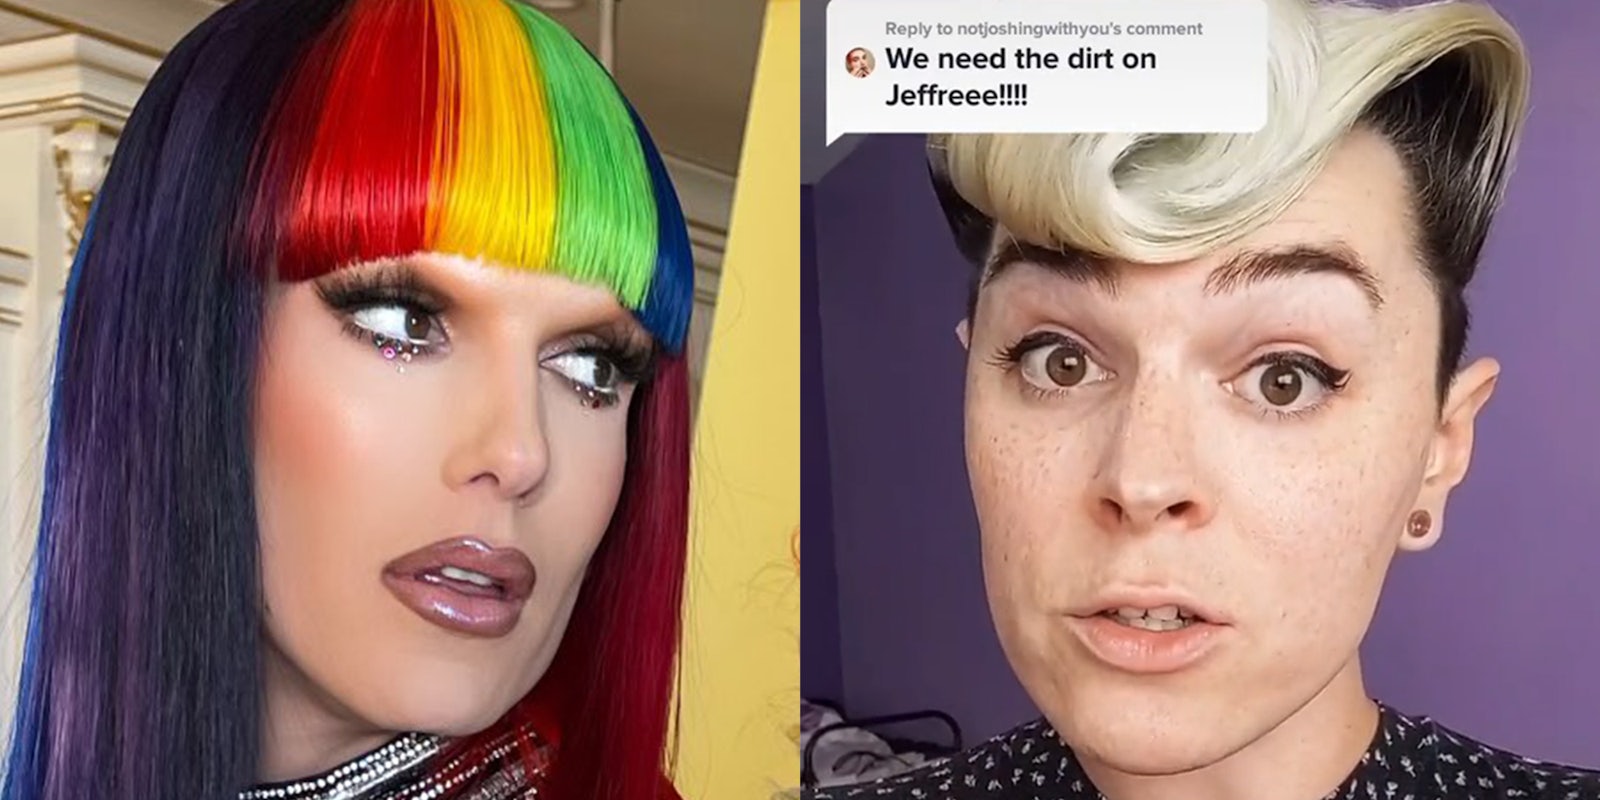 jeffree star (l) person with 'we need the dirt on Jeffreee!!!!' caption (r)